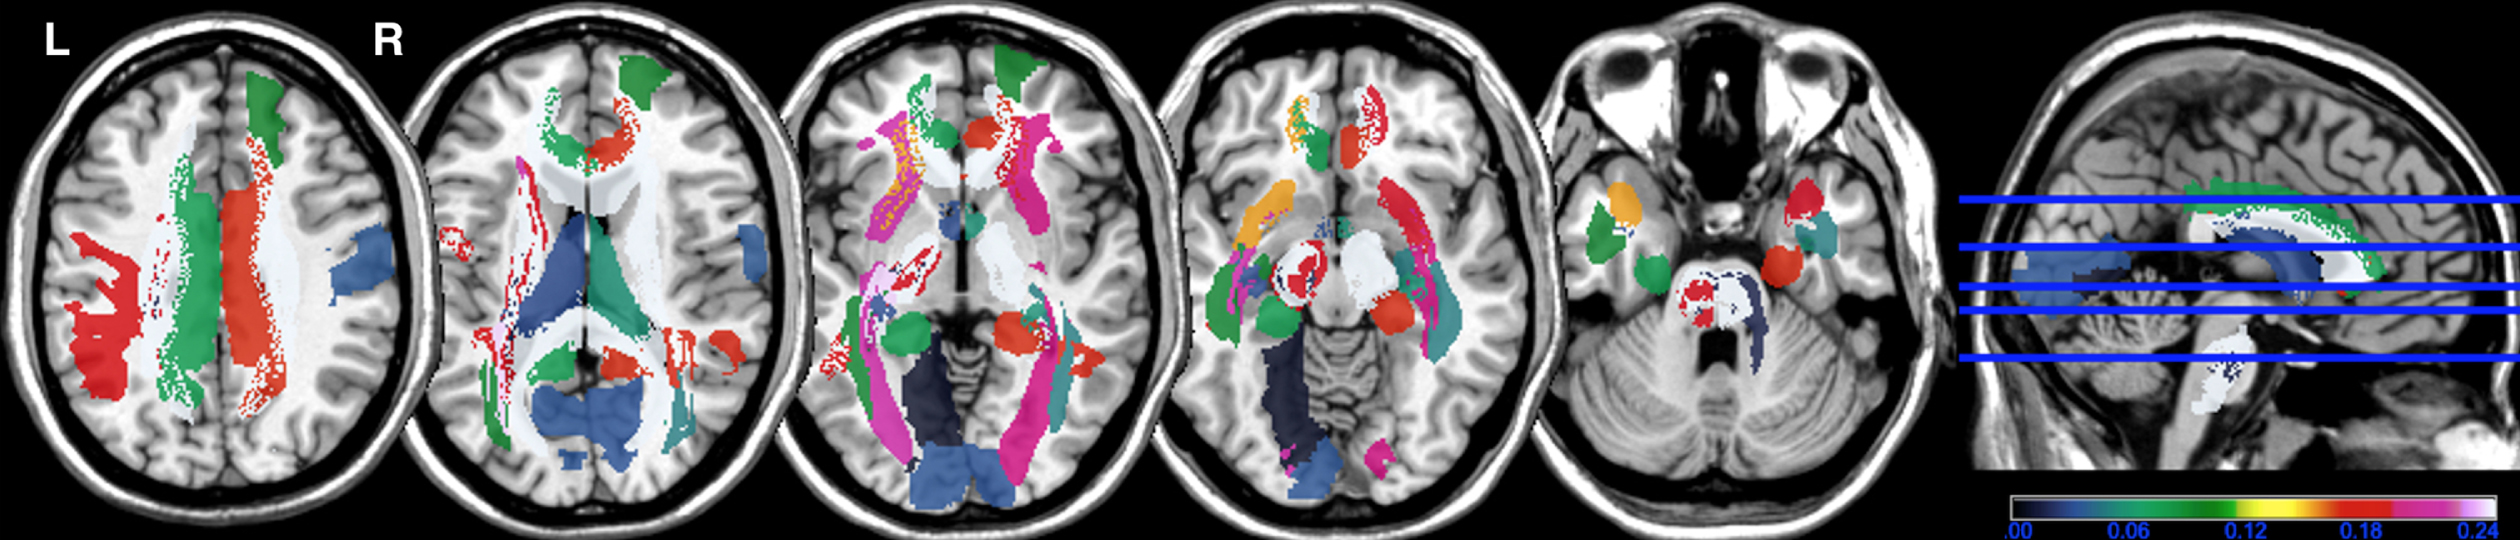 Frequency map of white matter hyperintensities in each structure. Color bar: frequency (higher number corresponds to higher frequency) of white matter hyperintensities in each structure of the Automatic Anatomical Labelling (AAL) and NatbrainLab (CAT) atlases. (e.g., tracts in white color correspond to the presence of WMH in 25% of patients). R, right; L, left.